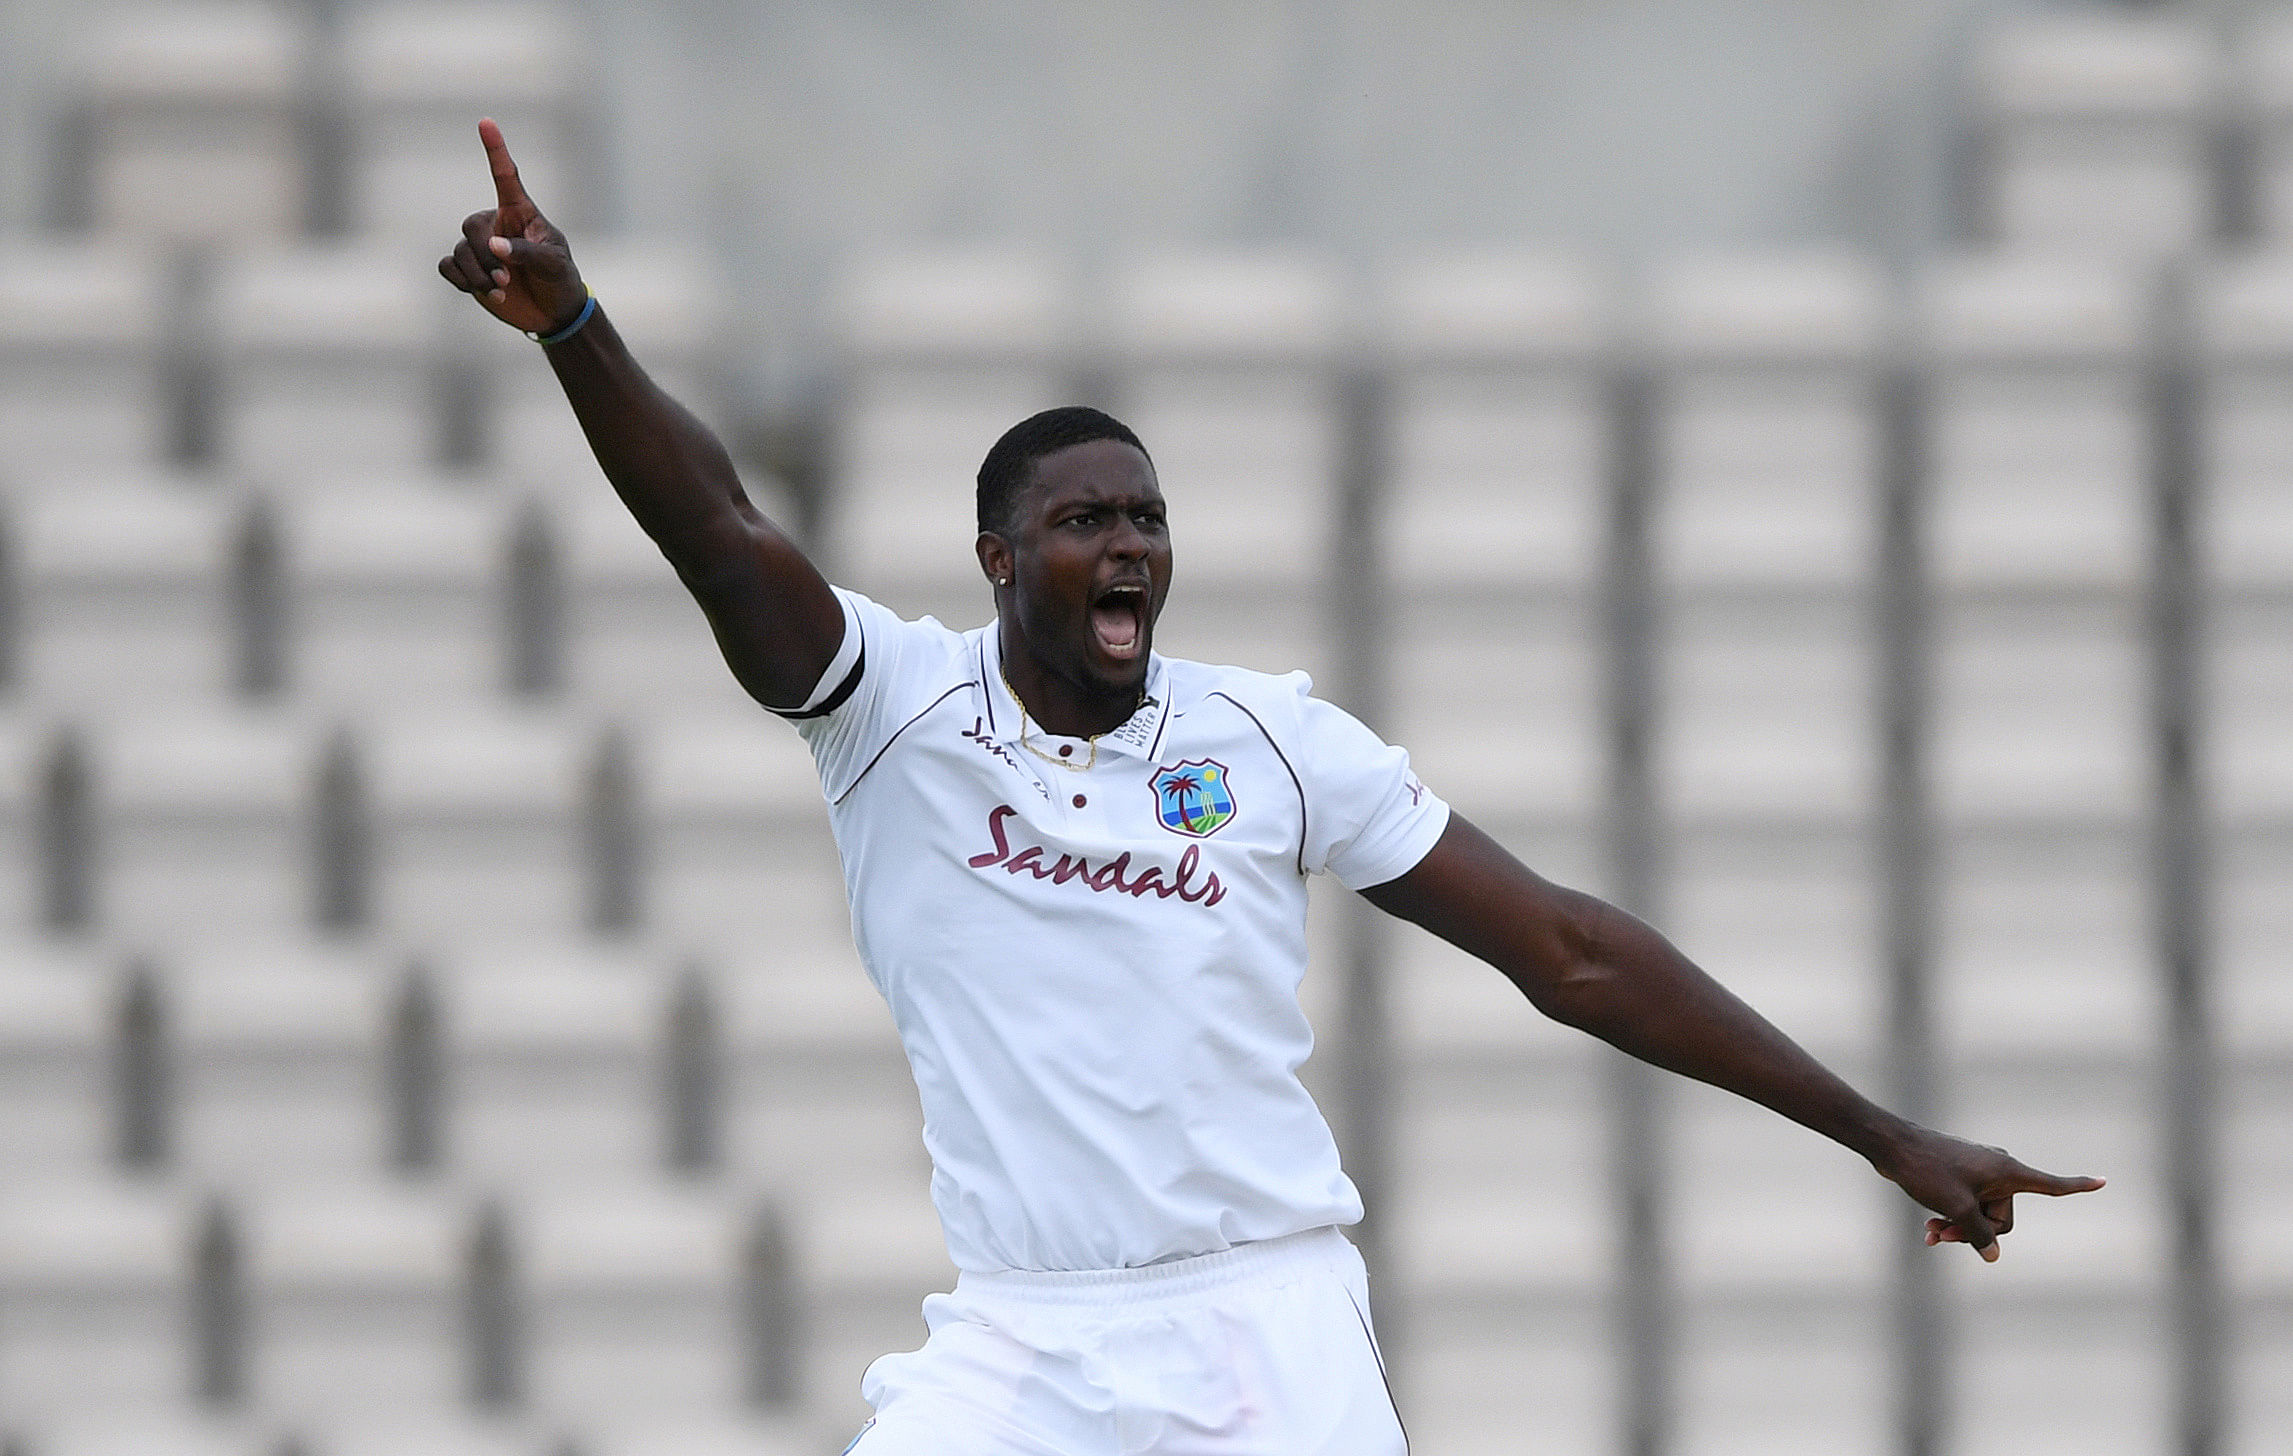 West Indies' Jason Holder celebrates taking the wicket of England's Ben Stokes, as play resumes behind closed doors following the outbreak of the coronavirus. Credit: Reuters Photo